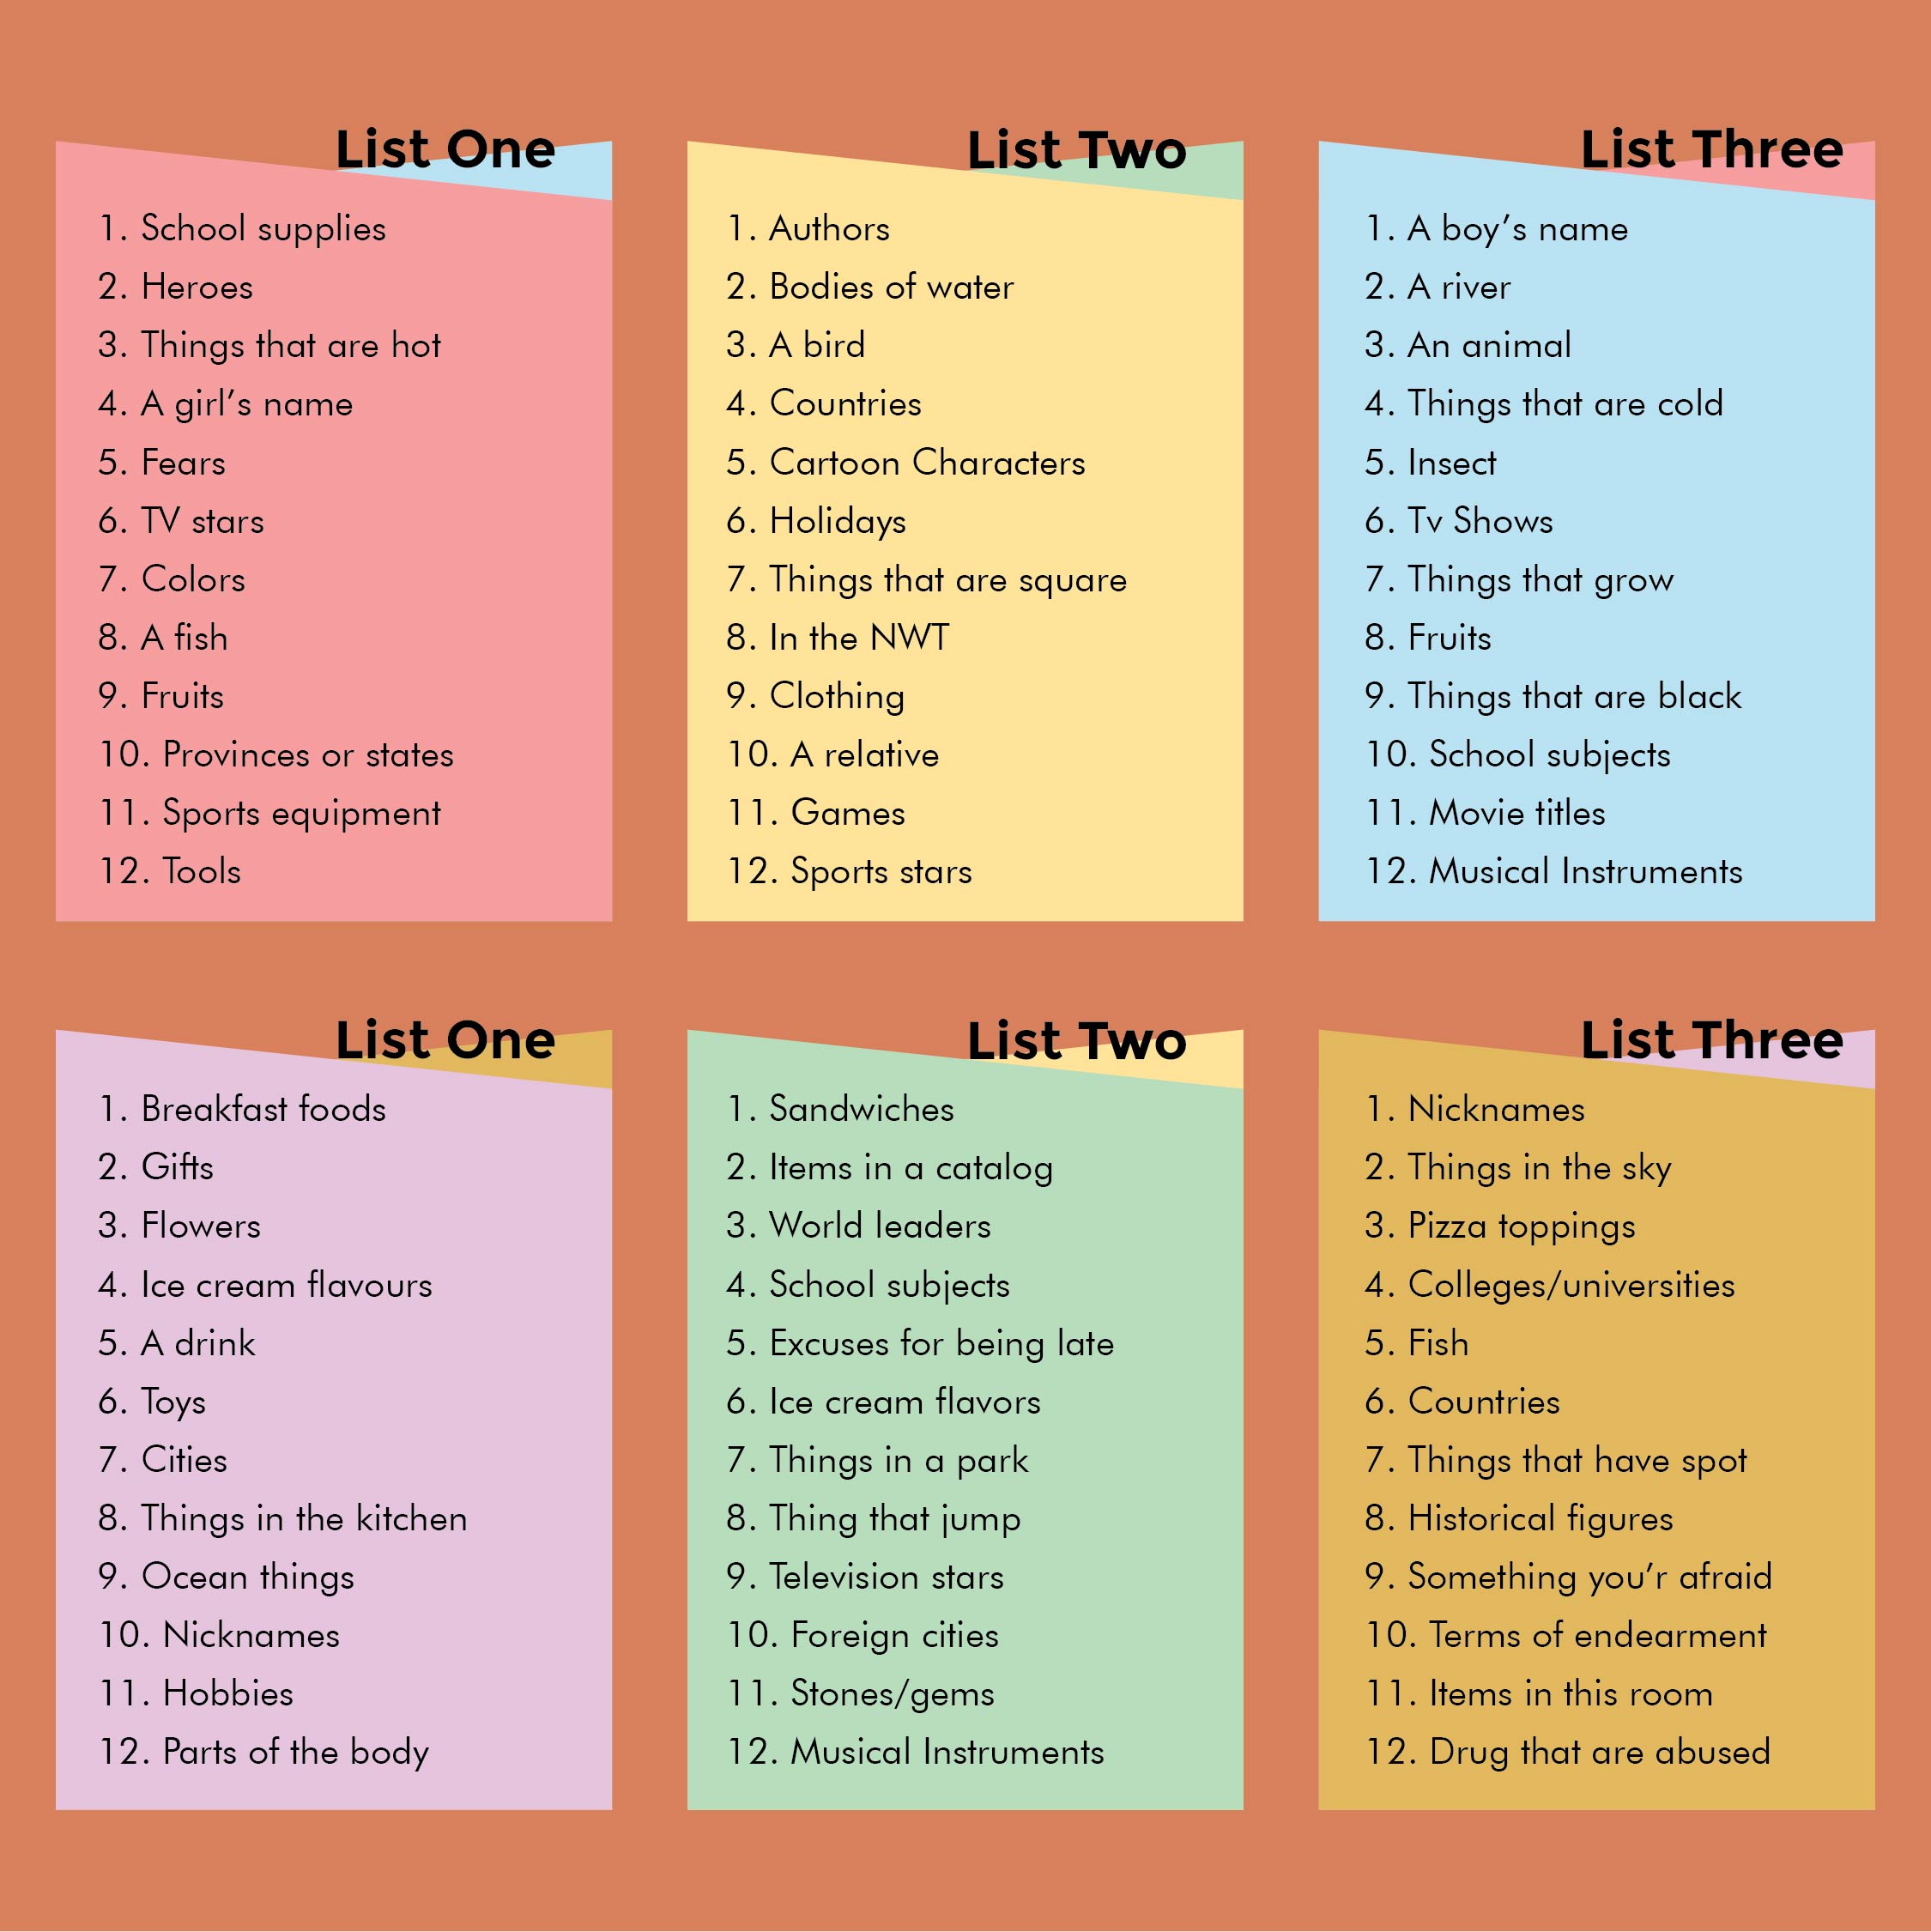 5-best-images-of-scattergories-lists-1-12-printable-printable